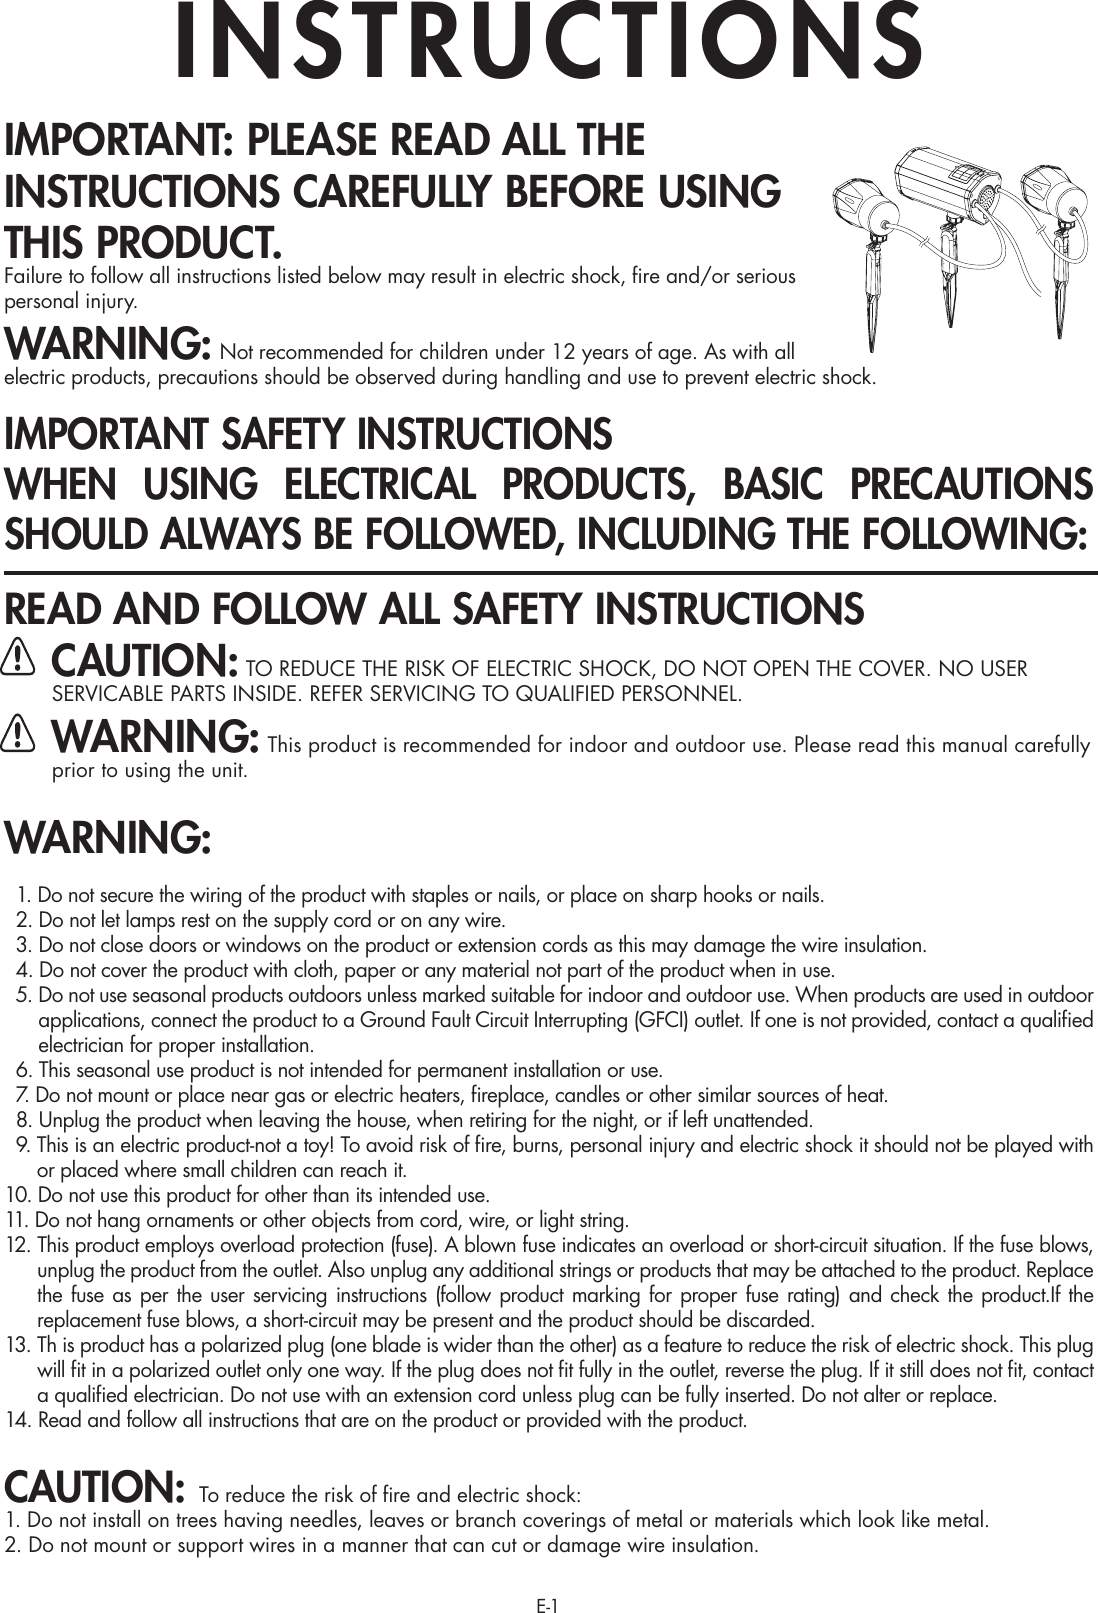 E-1IMPORTANT: PLEASE READ ALL THE INSTRUCTIONS CAREFULLY BEFORE USING THIS PRODUCT.Failure to follow all instructions listed below may result in electric shock, ﬁre and/or serious personal injury.WARNING: Not recommended for children under 12 years of age. As with all electric products, precautions should be observed during handling and use to prevent electric shock.IMPORTANT SAFETY INSTRUCTIONSWHEN USING ELECTRICAL PRODUCTS, BASIC PRECAUTIONS SHOULD ALWAYS BE FOLLOWED, INCLUDING THE FOLLOWING:READ AND FOLLOW ALL SAFETY INSTRUCTIONS CAUTION: TO REDUCE THE RISK OF ELECTRIC SHOCK, DO NOT OPEN THE COVER. NO USER SERVICABLE PARTS INSIDE. REFER SERVICING TO QUALIFIED PERSONNEL. WARNING: This product is recommended for indoor and outdoor use. Please read this manual carefully      prior to using the unit.WARNING:  1. Do not secure the wiring of the product with staples or nails, or place on sharp hooks or nails.  2. Do not let lamps rest on the supply cord or on any wire.  3. Do not close doors or windows on the product or extension cords as this may damage the wire insulation.  4. Do not cover the product with cloth, paper or any material not part of the product when in use.  5.  Do not use seasonal products outdoors unless marked suitable for indoor and outdoor use. When products are used in outdoor applications, connect the product to a Ground Fault Circuit Interrupting (GFCI) outlet. If one is not provided, contact a qualiﬁed electrician for proper installation.  6.  This seasonal use product is not intended for permanent installation or use.  7.  Do not mount or place near gas or electric heaters, ﬁreplace, candles or other similar sources of heat.  8.  Unplug the product when leaving the house, when retiring for the night, or if left unattended.  9.  This is an electric product-not a toy! To avoid risk of ﬁre, burns, personal injury and electric shock it should not be played with or placed where small children can reach it.10.  Do not use this product for other than its intended use.11. Do not hang ornaments or other objects from cord, wire, or light string.12.  This product employs overload protection (fuse). A blown fuse indicates an overload or short-circuit situation. If the fuse blows, unplug the product from the outlet. Also unplug any additional strings or products that may be attached to the product. Replace the fuse as per the user servicing instructions (follow product marking for proper fuse rating) and check the product.If the replacement fuse blows, a short-circuit may be present and the product should be discarded.13.  Th is product has a polarized plug (one blade is wider than the other) as a feature to reduce the risk of electric shock. This plug will ﬁt in a polarized outlet only one way. If the plug does not ﬁt fully in the outlet, reverse the plug. If it still does not ﬁt, contact a qualiﬁed electrician. Do not use with an extension cord unless plug can be fully inserted. Do not alter or replace.14. Read and follow all instructions that are on the product or provided with the product.CAUTION: To reduce the risk of ﬁre and electric shock:1. Do not install on trees having needles, leaves or branch coverings of metal or materials which look like metal. 2. Do not mount or support wires in a manner that can cut or damage wire insulation.INSTRUCTIONS